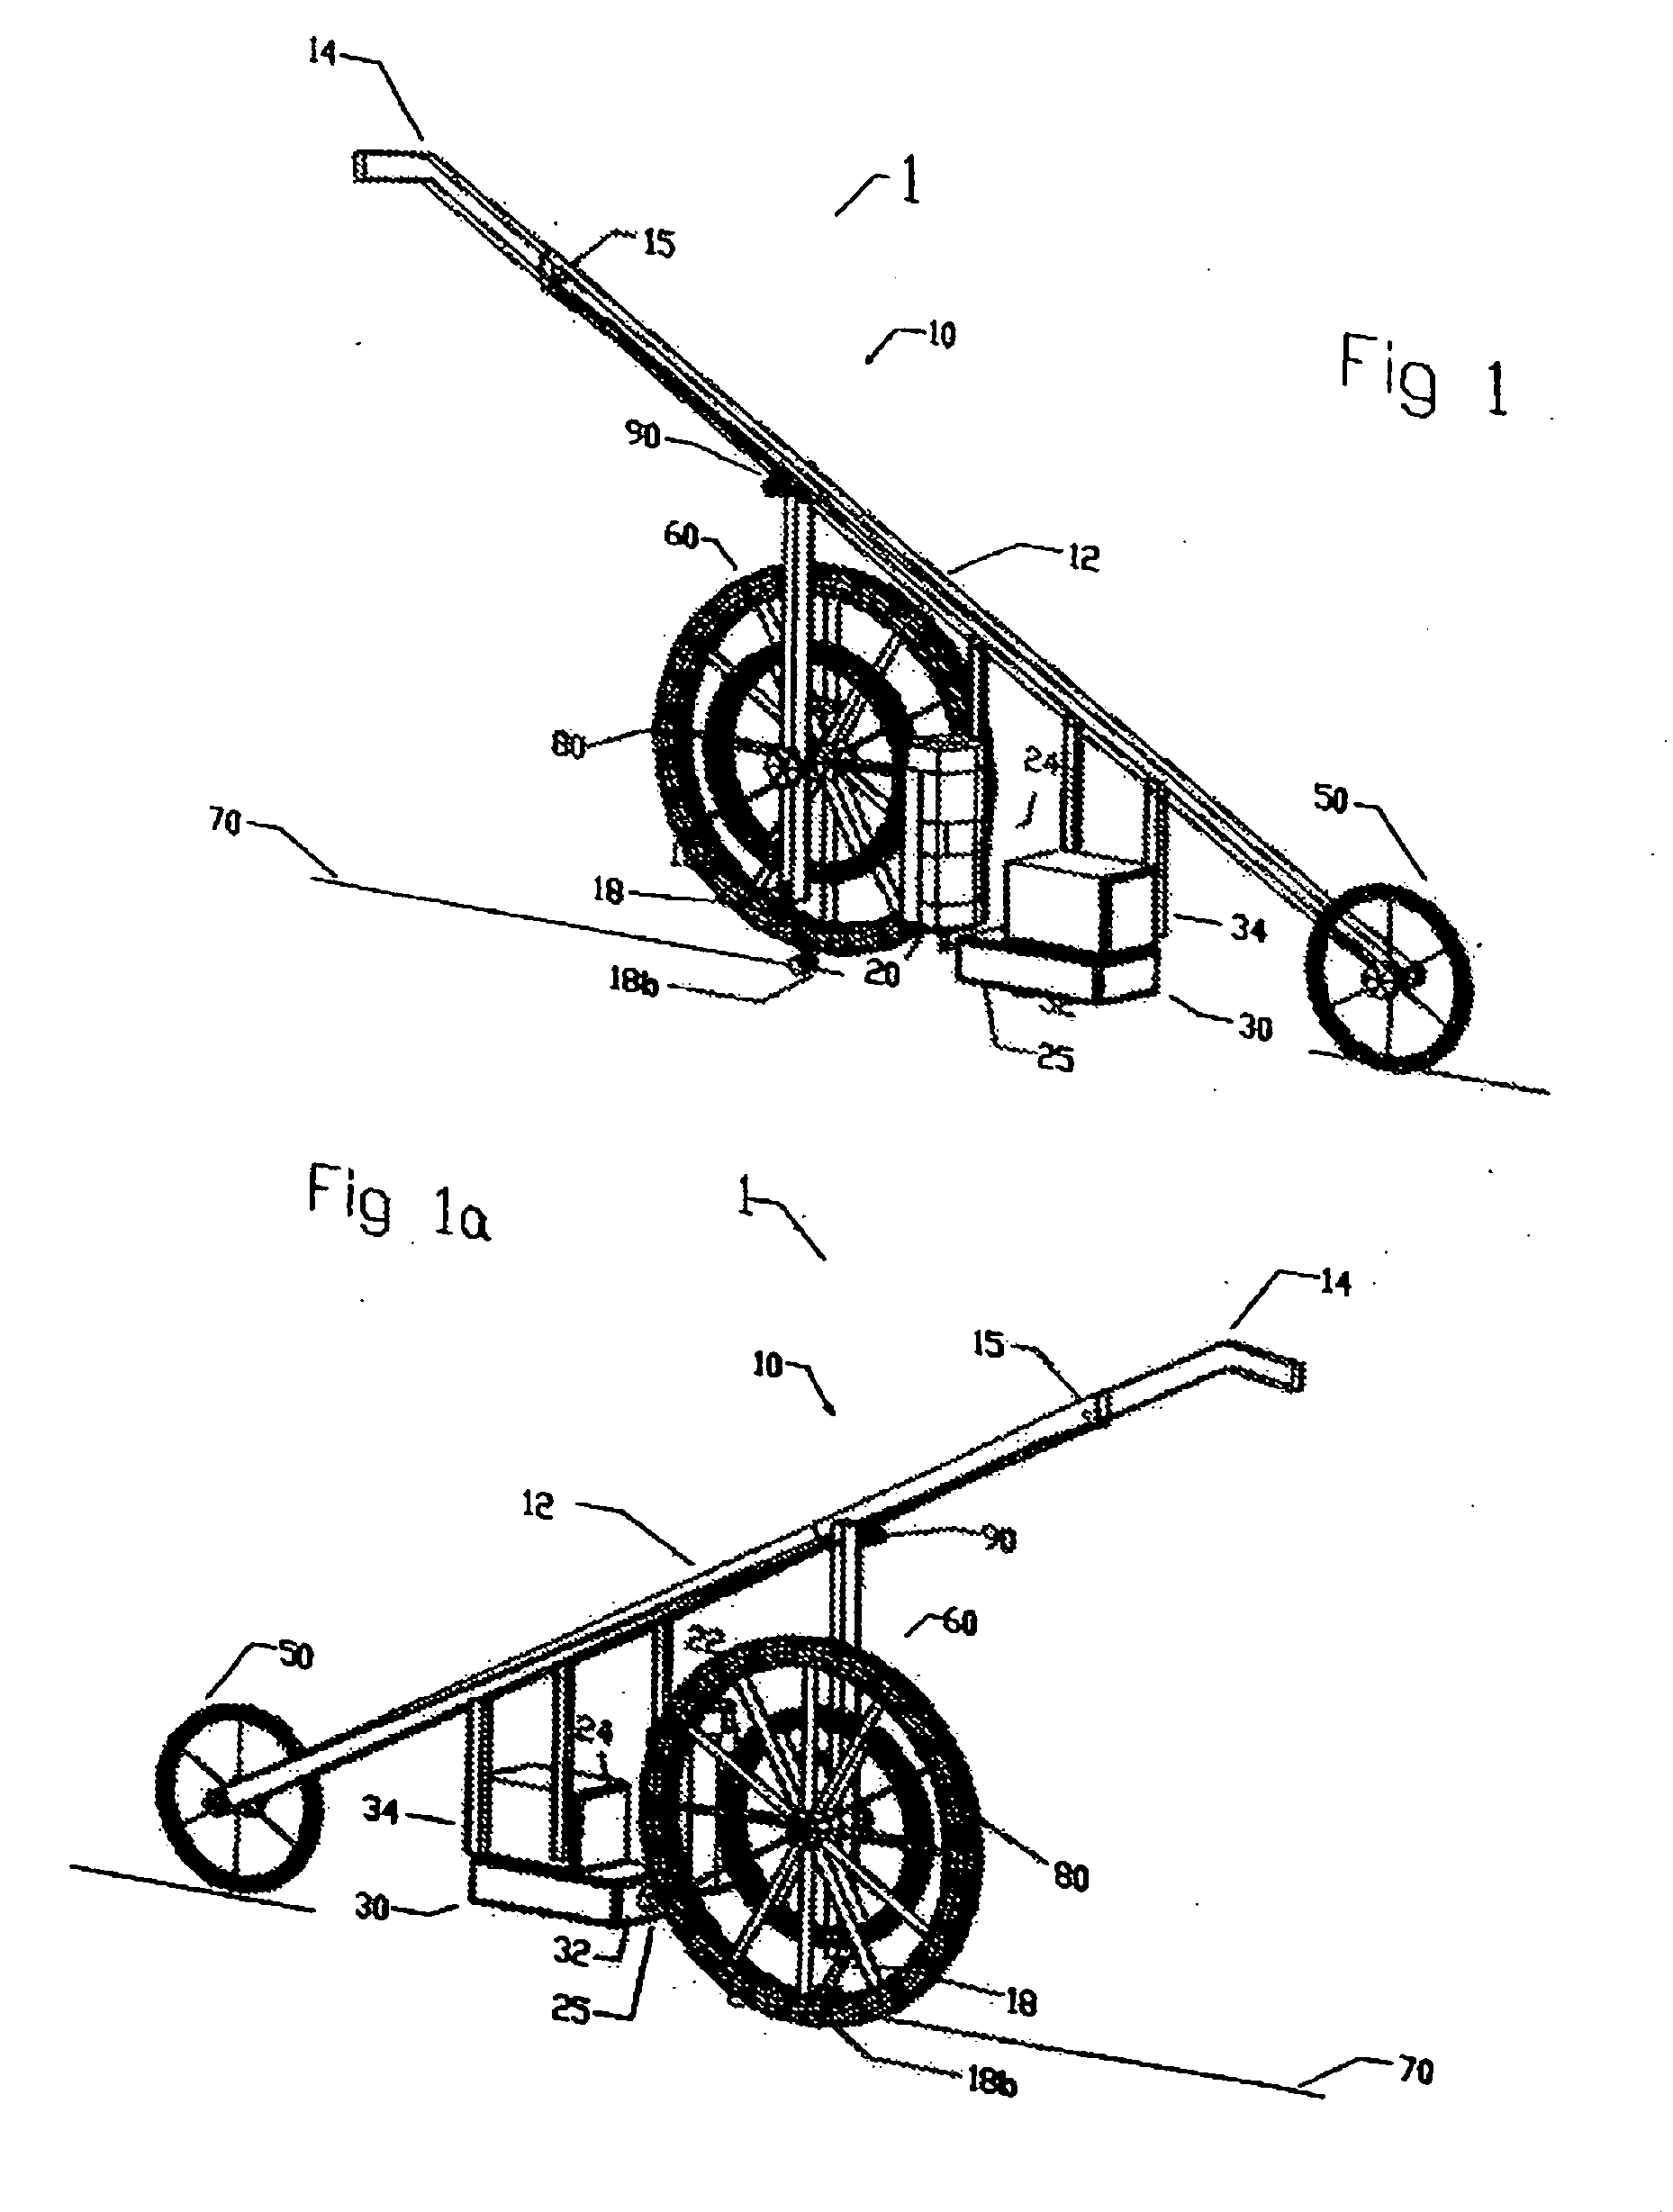 Marking and measuring device